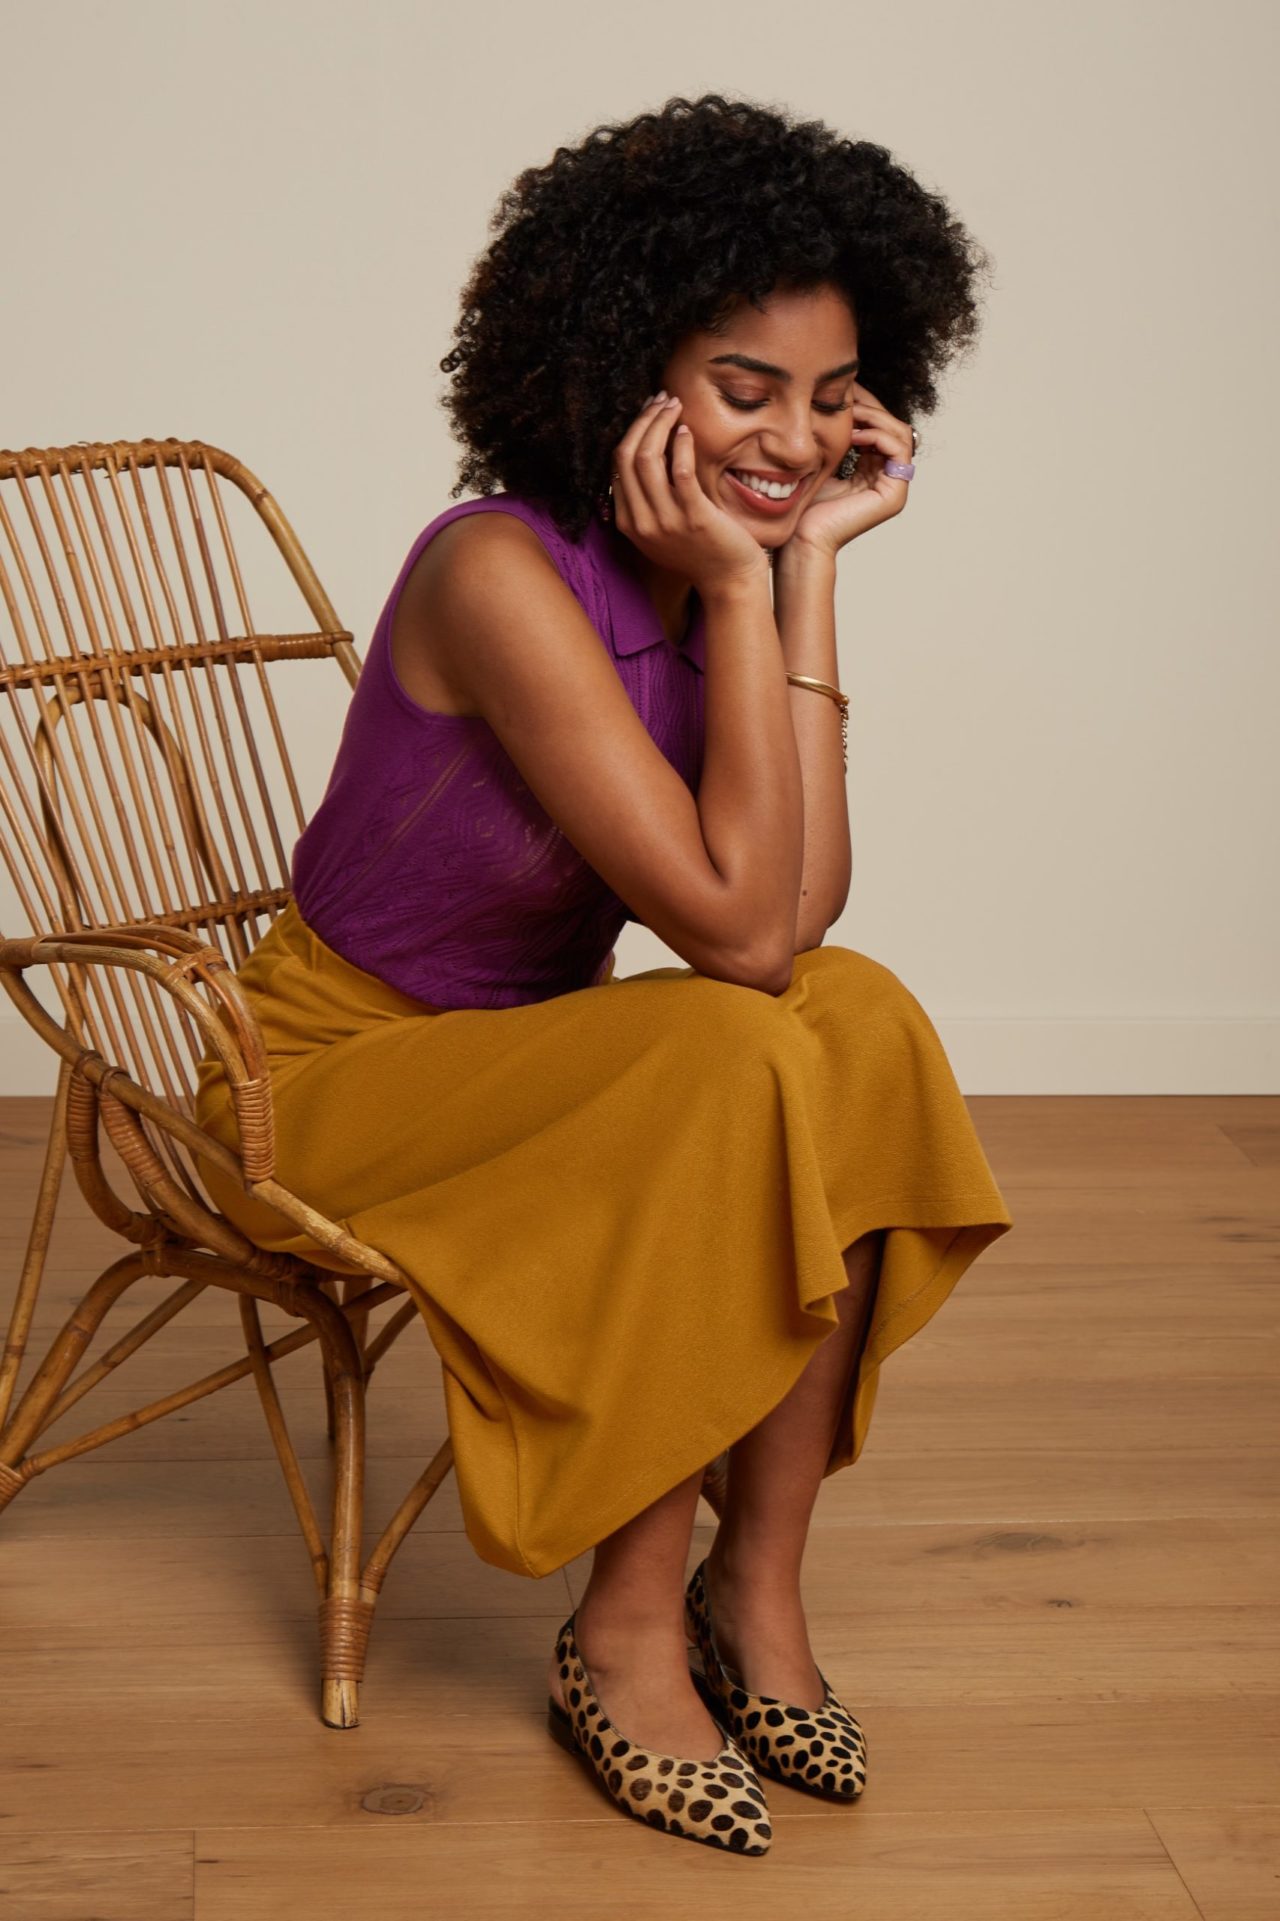 An elevated eCommerce promotional image featuring a delighted woman seated on a chair with a joyful smile, beautifully captured by I Heart Studios.